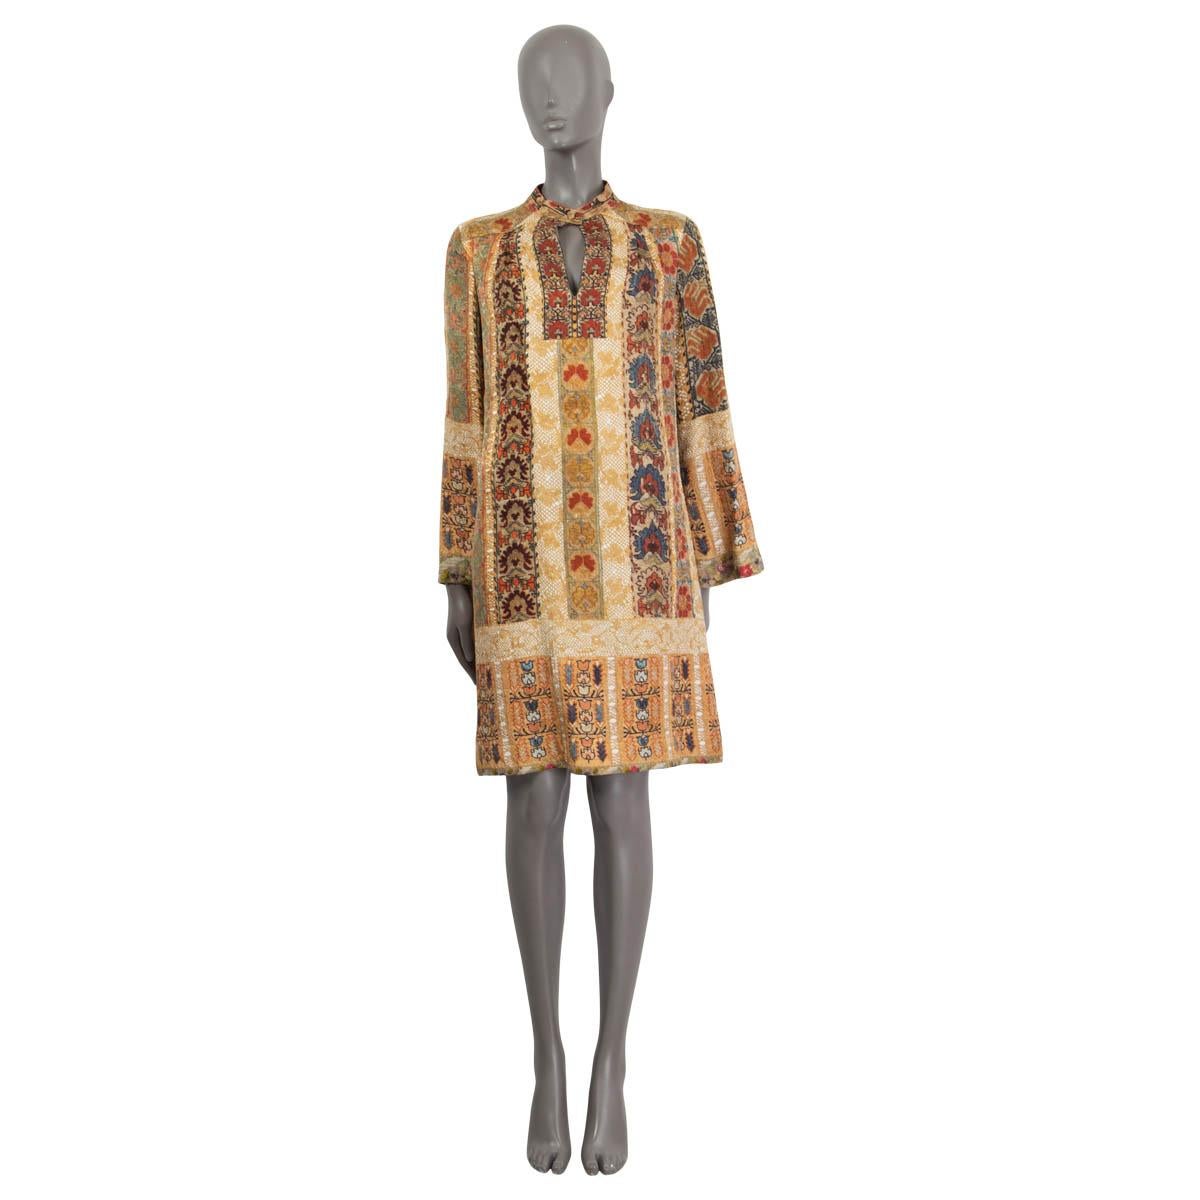 100% authentic Etro long sleeve dress in beige, green, burgundy and blue silk (38%), viscose (35%) and wool (27%). Embellished with floral stripe prints and a round split neck. Opens with a button on the neck. Unlined. Has been worn and is in